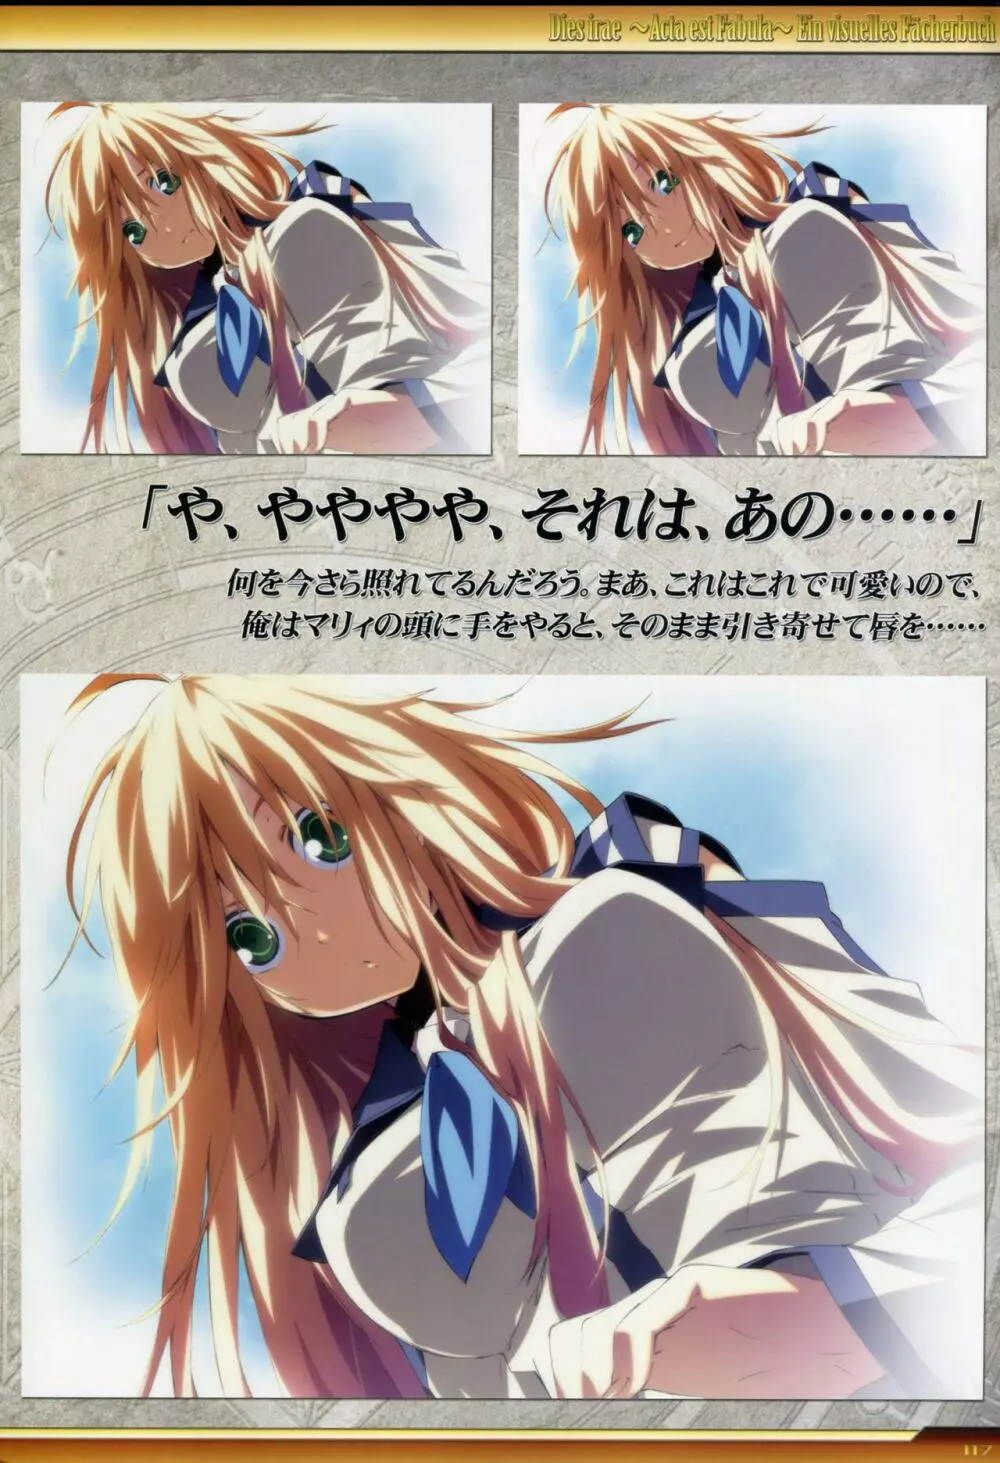 Dies irae Visual Fanbook - White Book Page.118